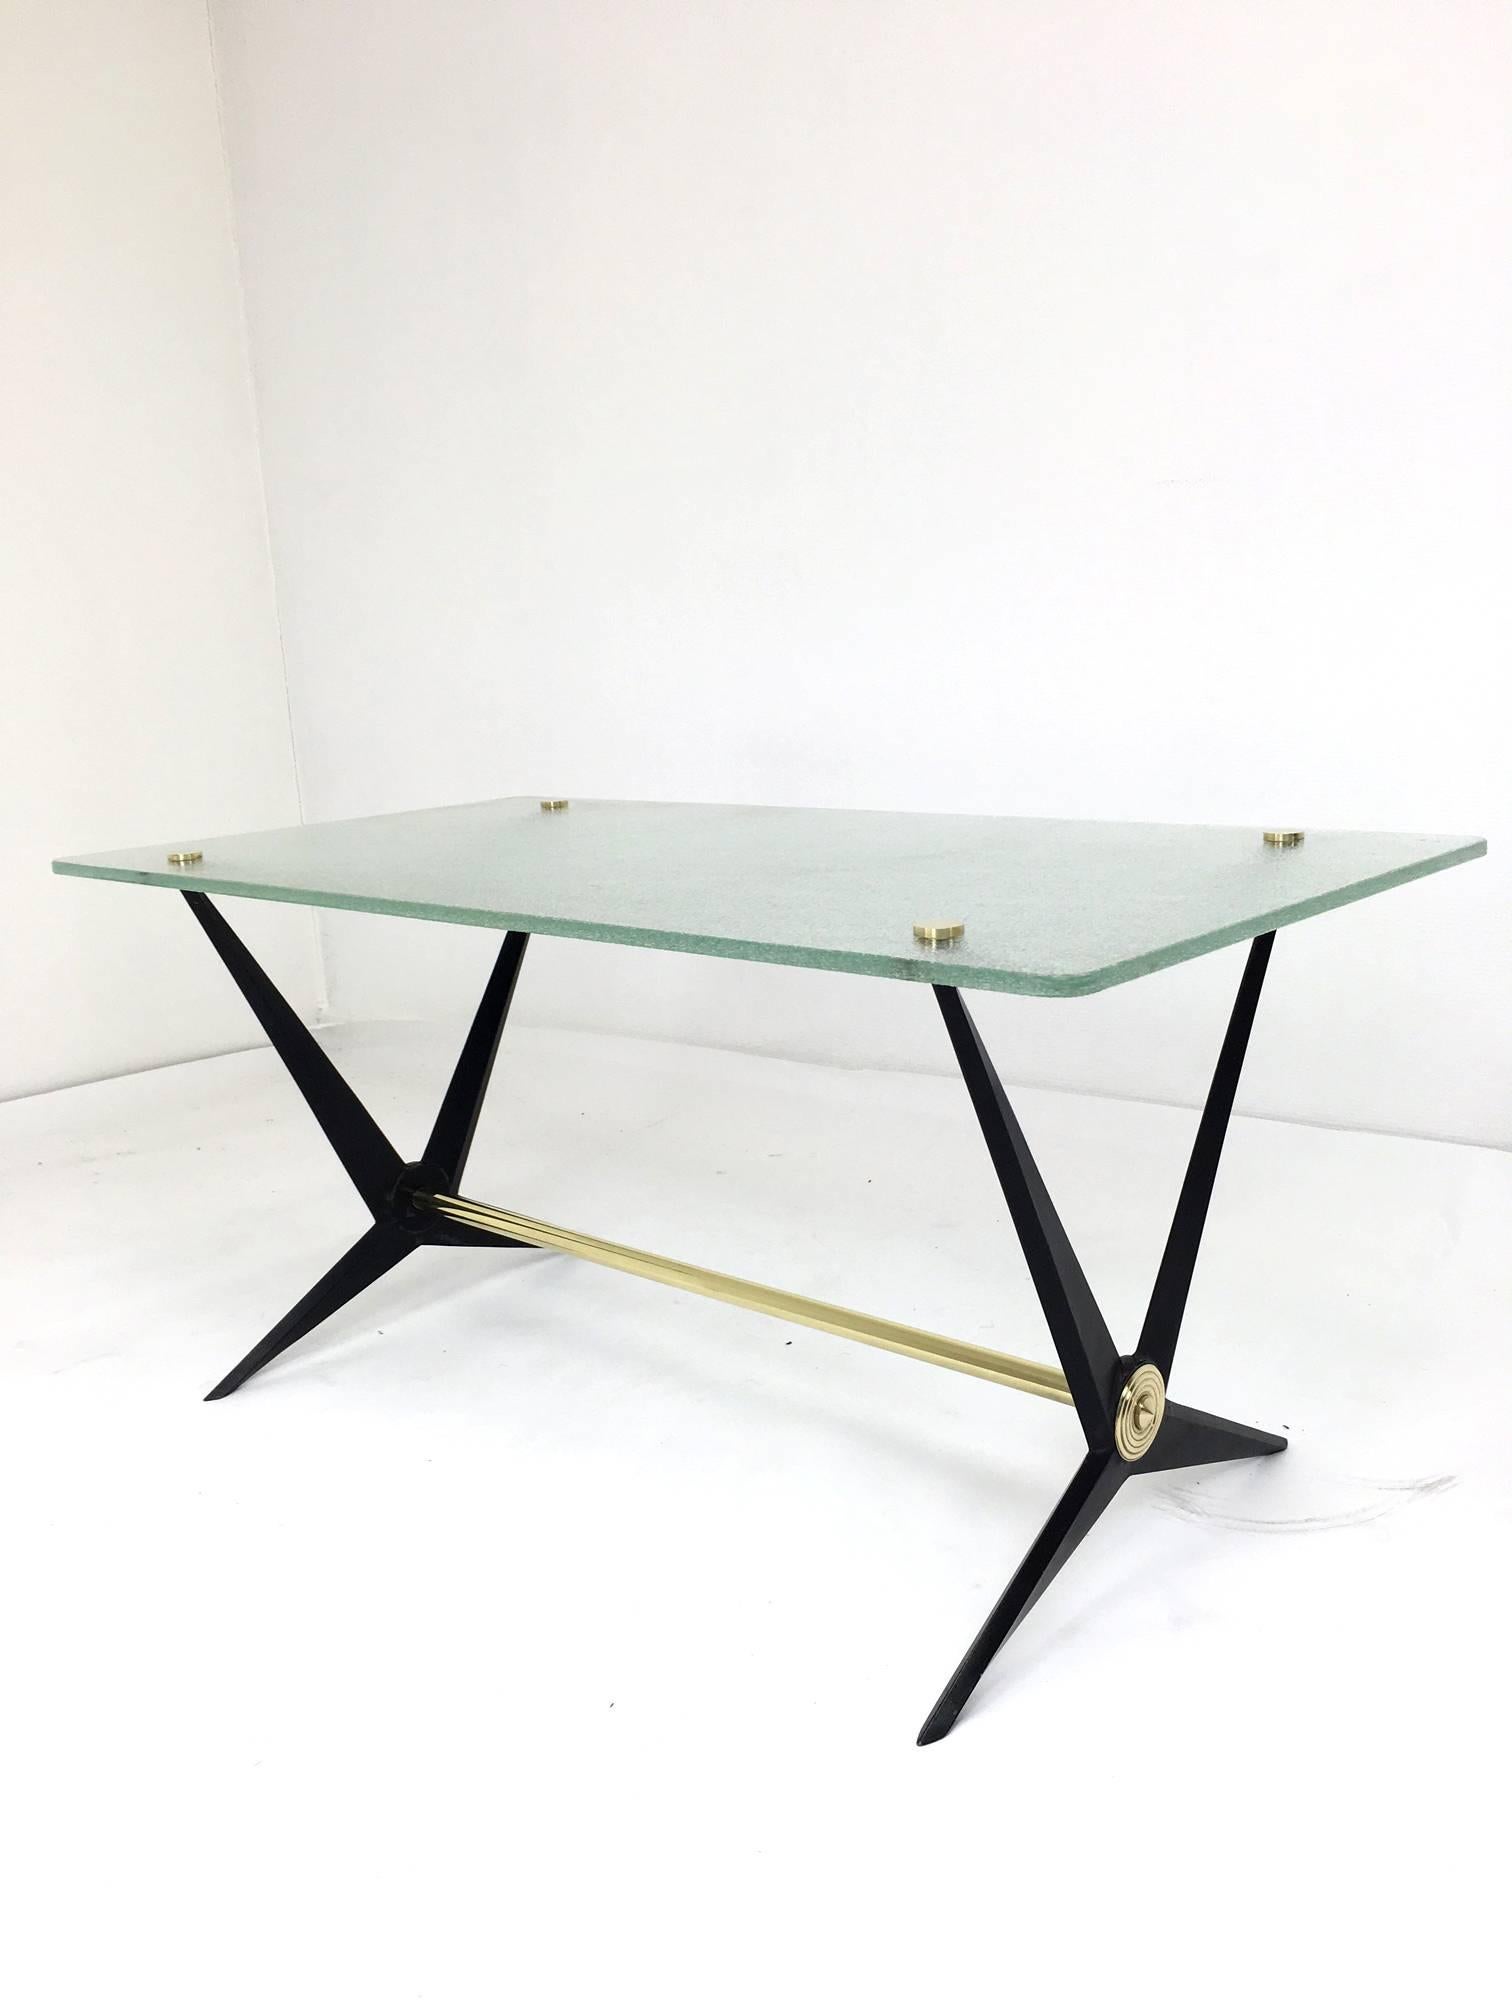 This back cast iron and brass side table was designed by Angelo Ostuni. It has a tempered glass top with slightly rounded corners and four brass circular fittings to secure the glass to the base. There is brass decorative detailing on the frame.

We